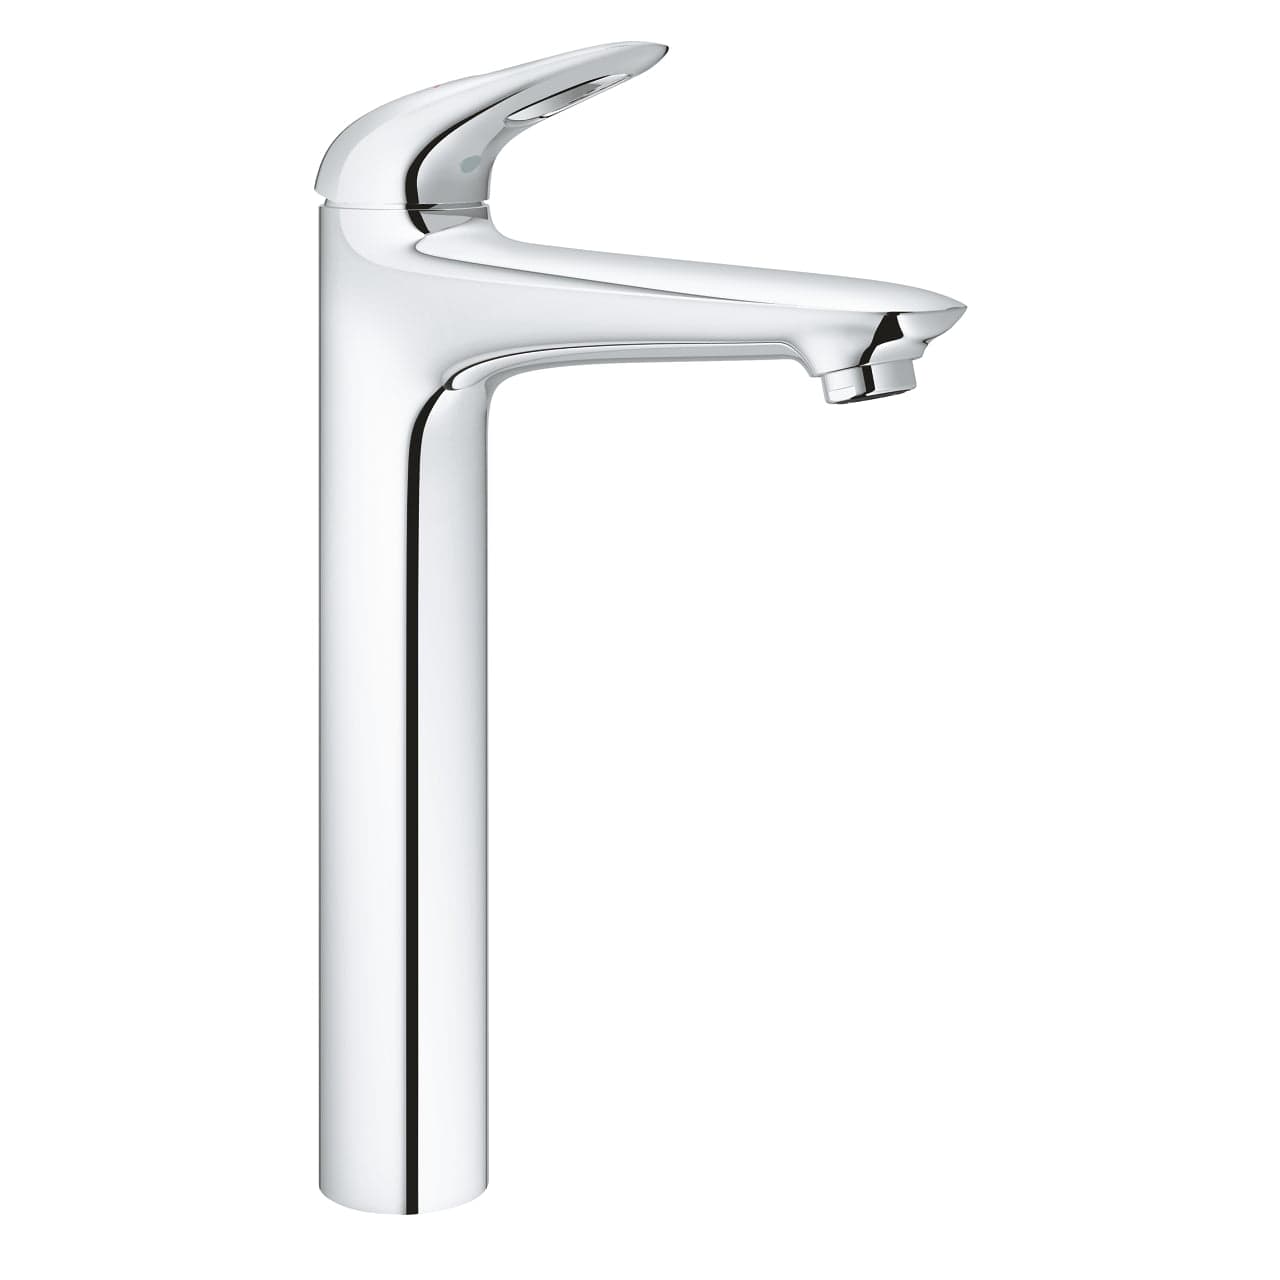 Grohe Eurostyle Single-lever basin mixer 1/2″ XL-Size, Chrome | Supply Master | Accra, Ghana Bathroom Faucet Buy Tools hardware Building materials